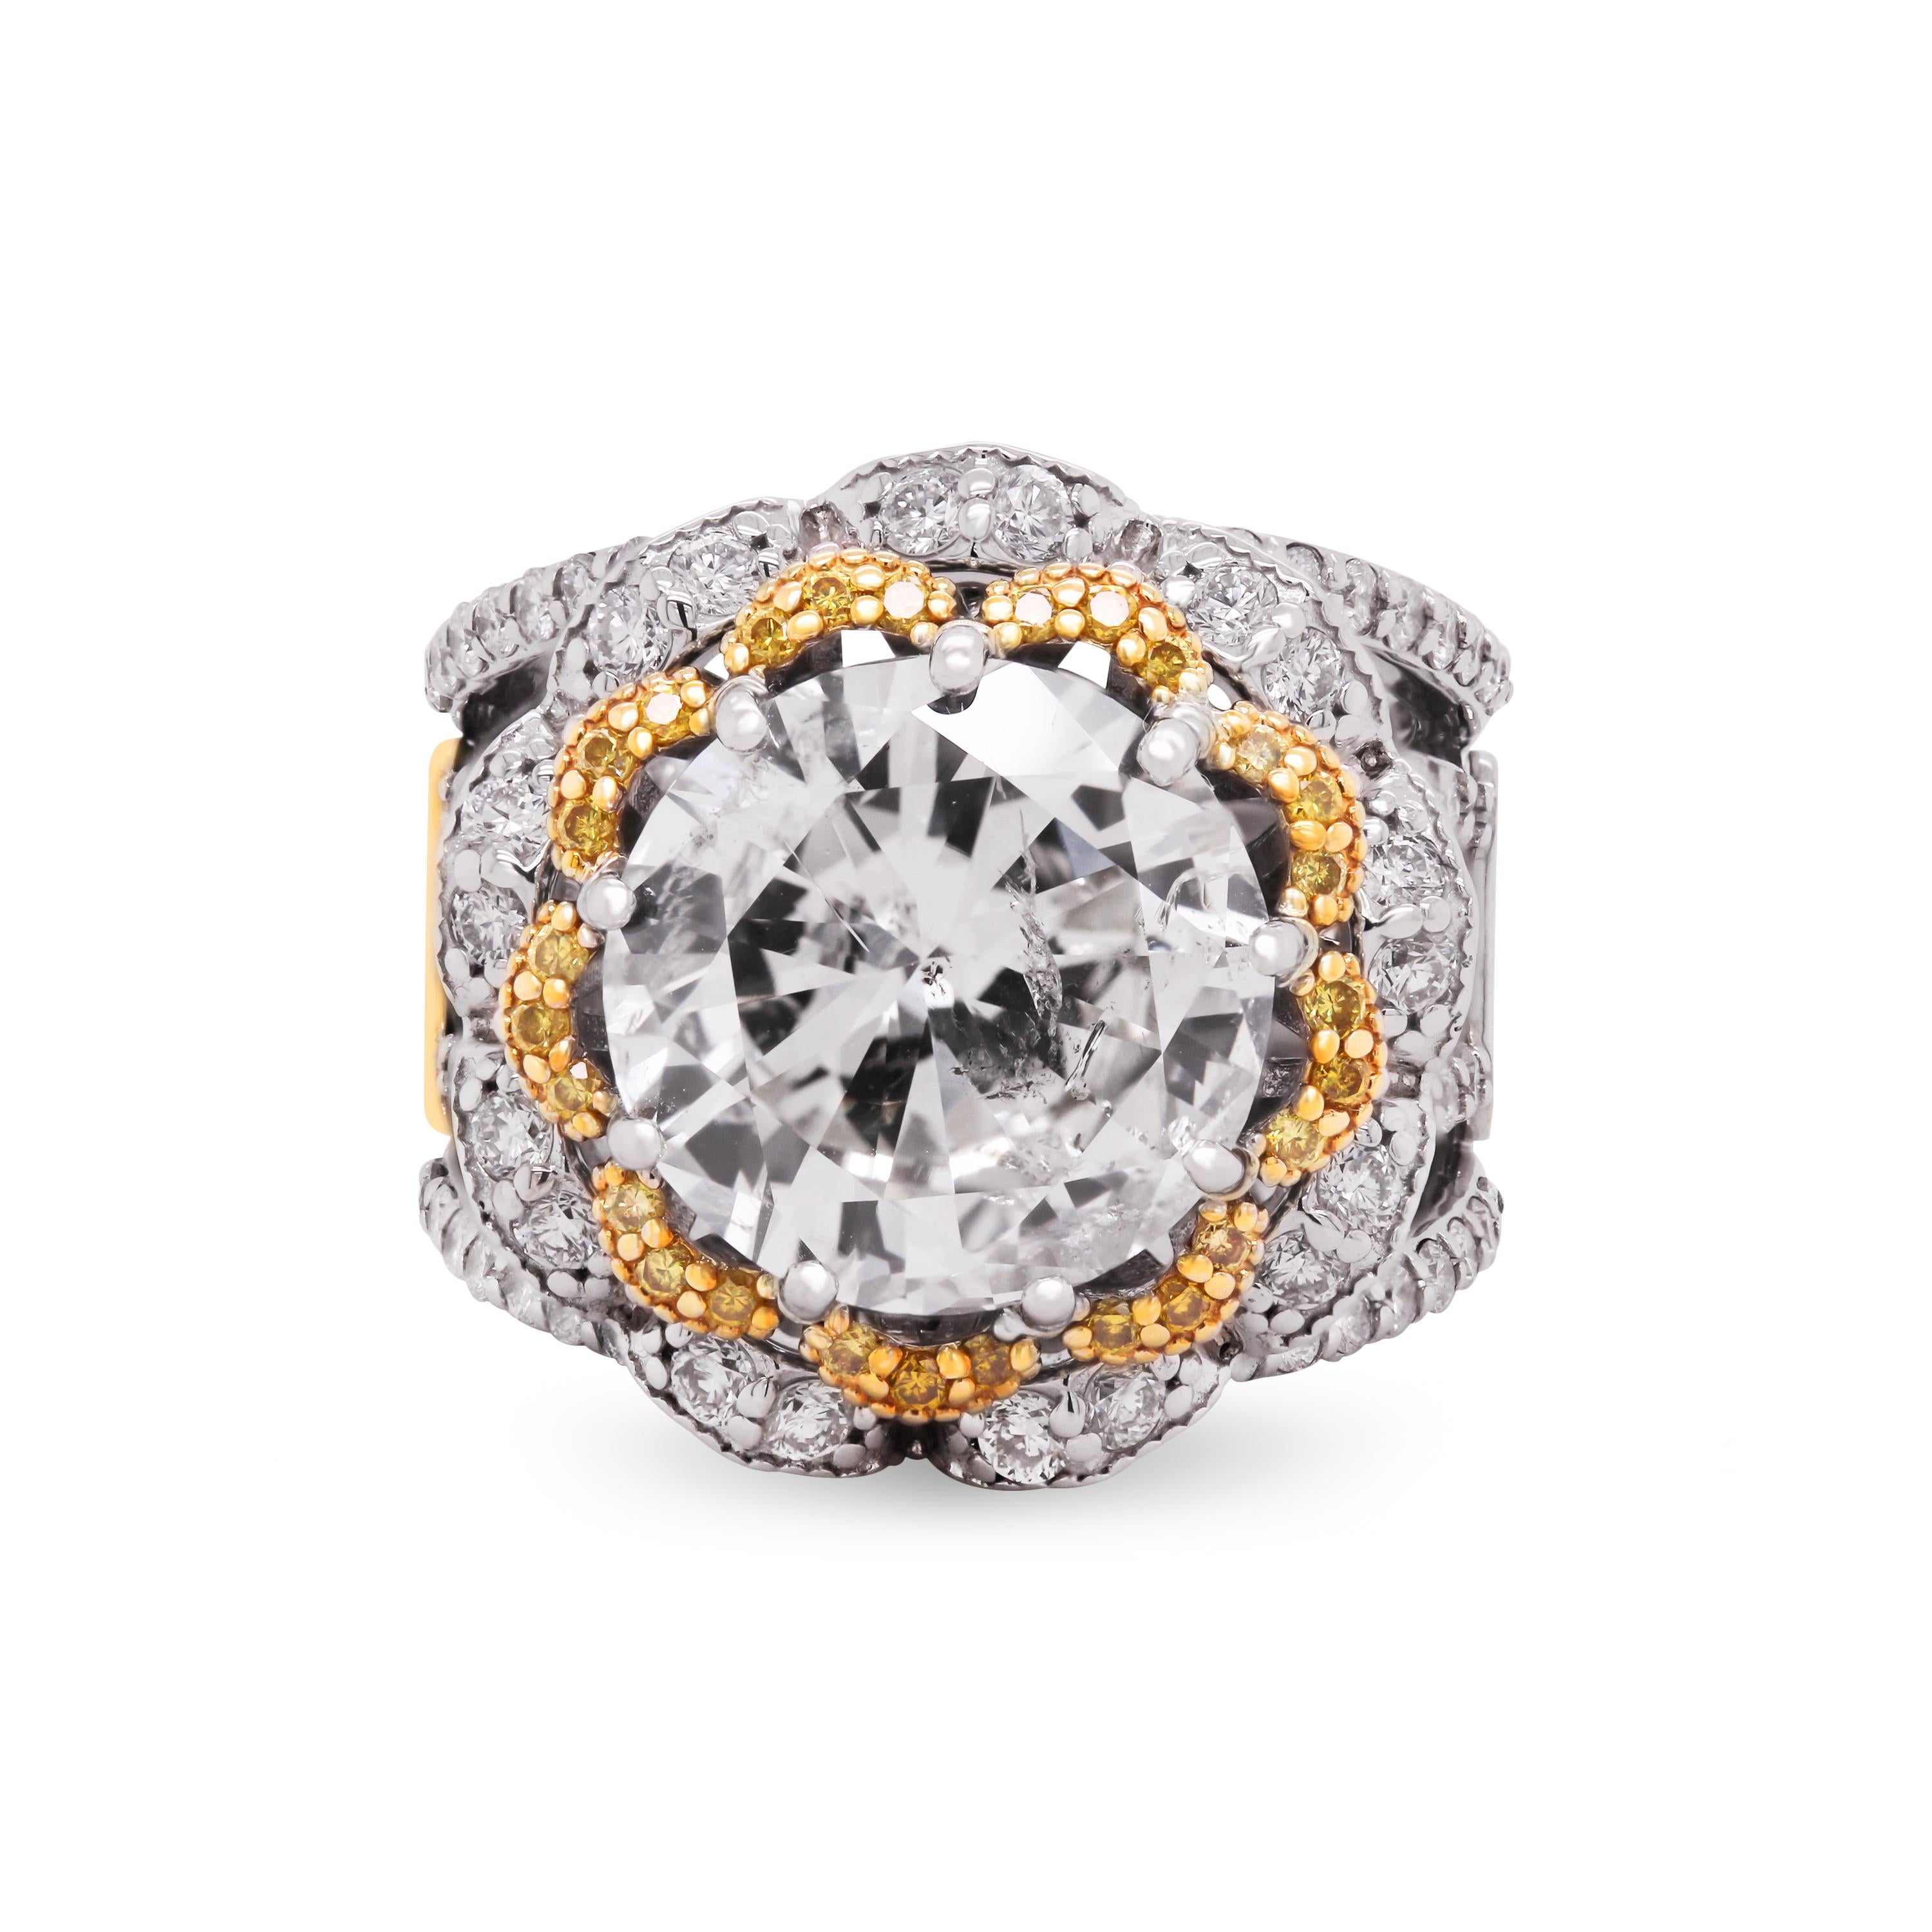 Stambolian 18K Gold 5.97 Carat Round Diamond Yellow Diamonds Four Band Ring

This one-of-a-kind masterpiece ring by Stambolian features a 5.97 carat K color, I clarity diamond center along with fancy yellow diamonds surrounding the center along with